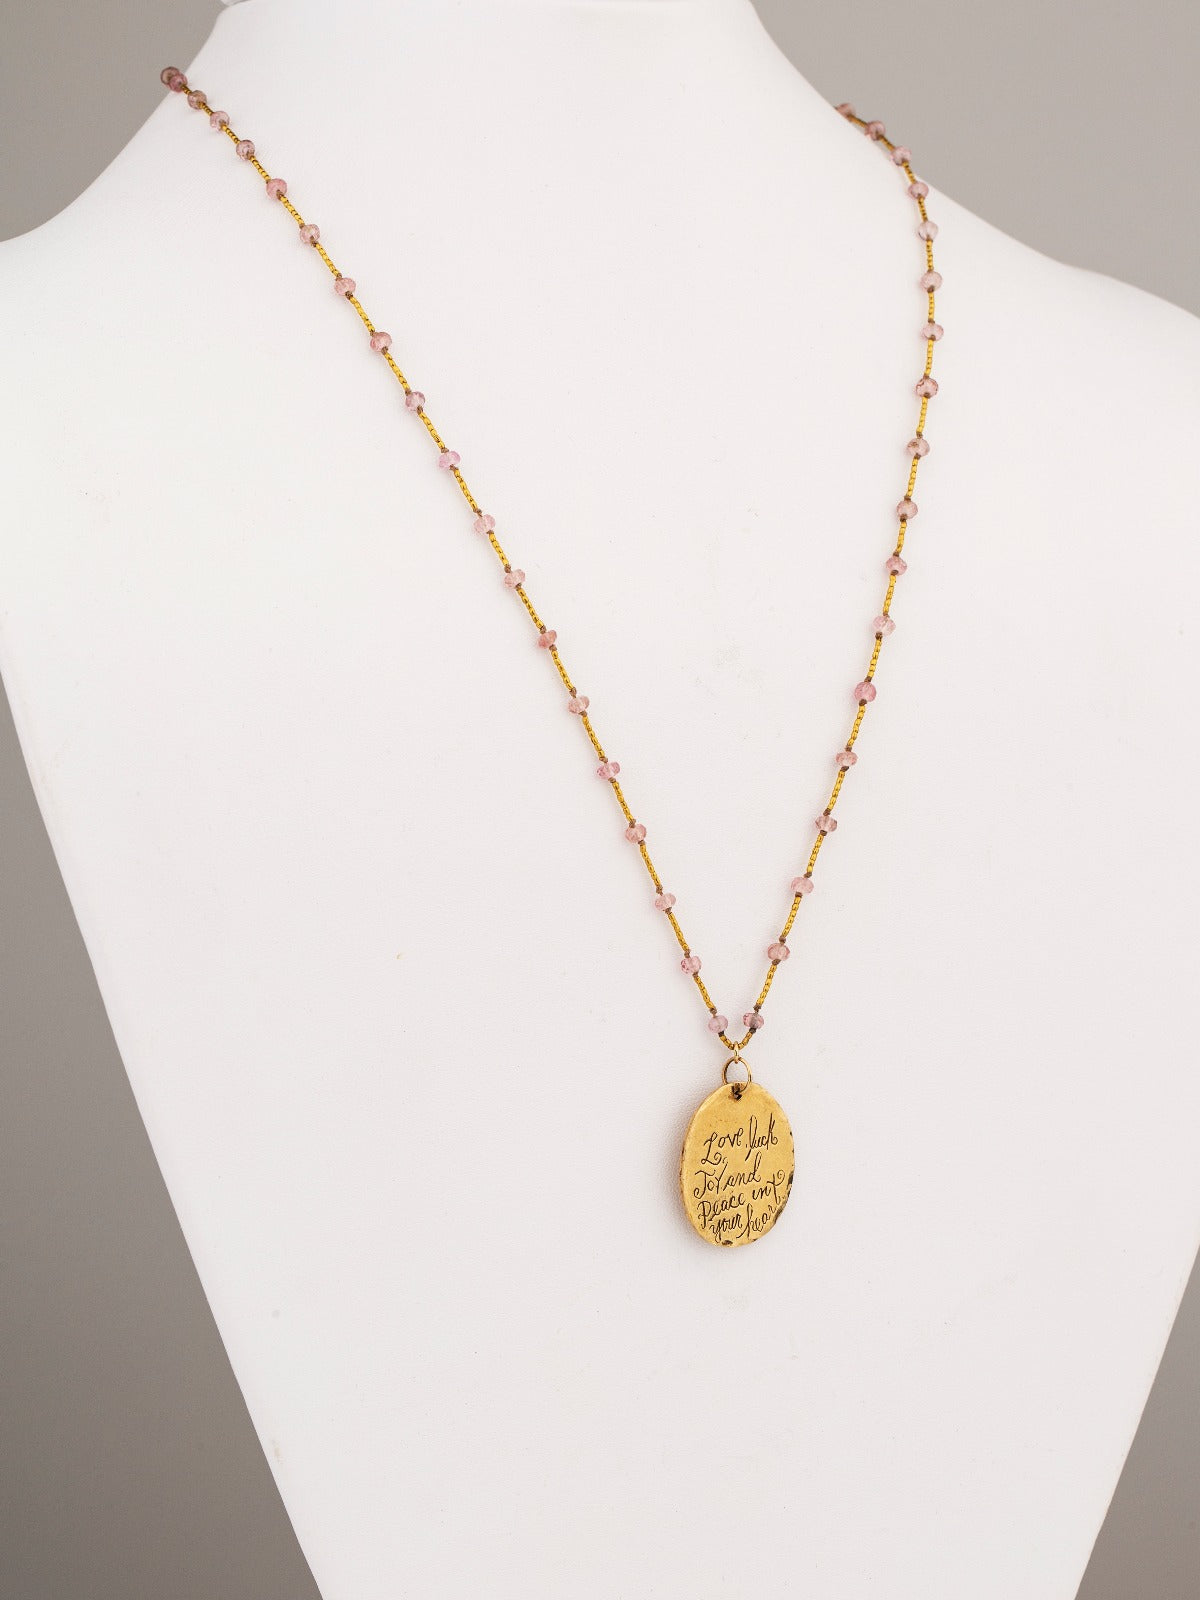 Joy and Peace Necklace